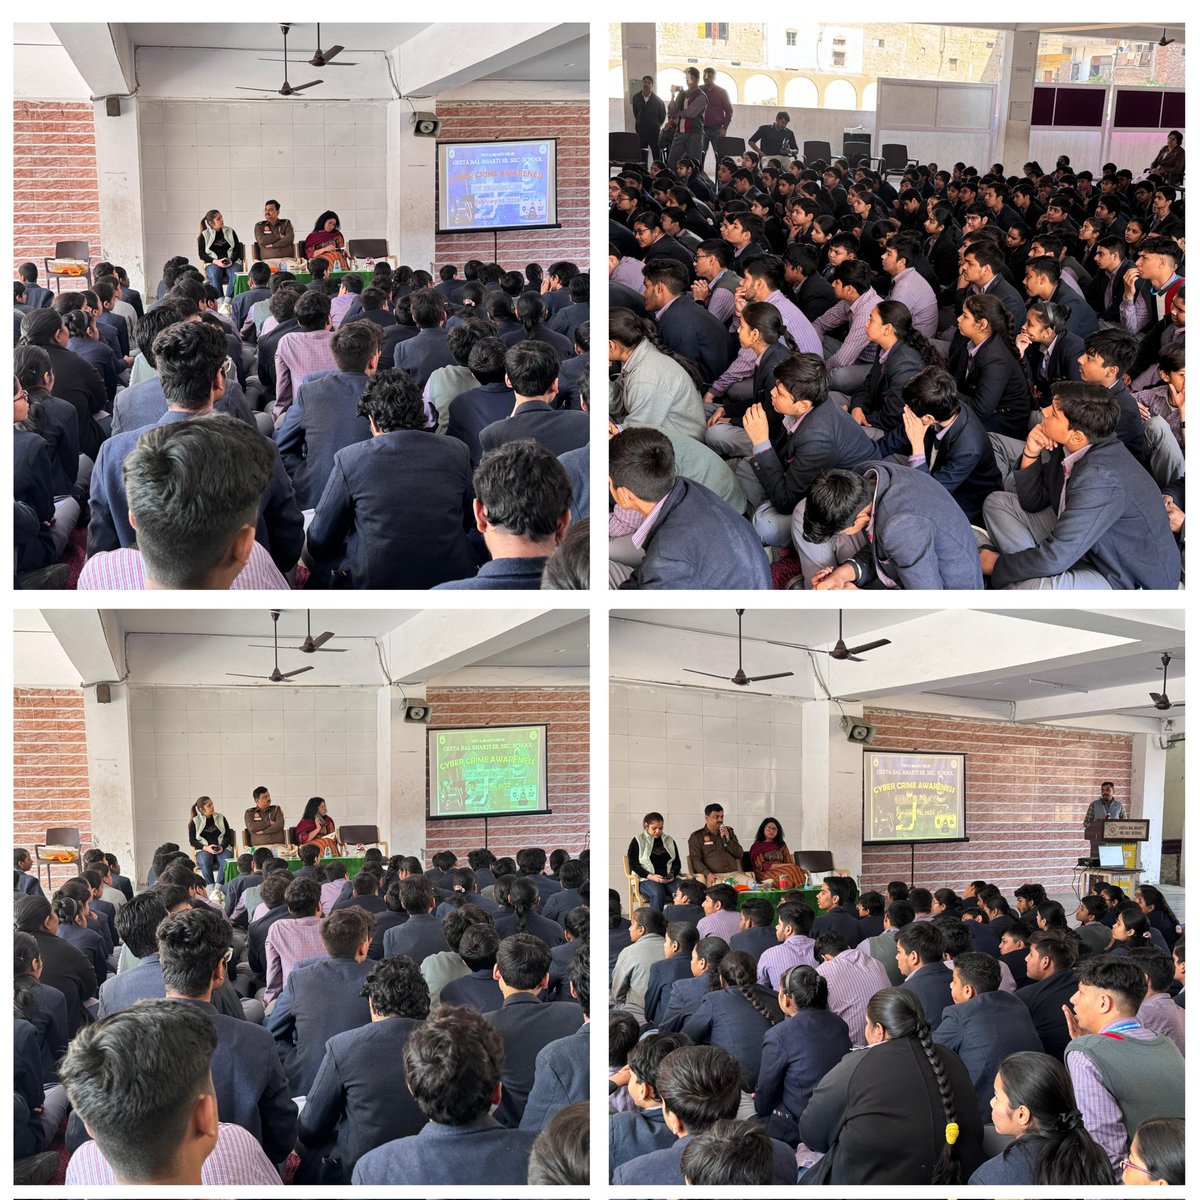 A Cyber awareness programme was organized by the Cyber Cell of #ShahdaraDistrict with Geeta Bal Bharti Sr. Sec. School students regarding awareness of Cyber/ OnlineFrauds.
@HMOIndia
@CPDelhi
@AddlCPER
@DelhiPolice